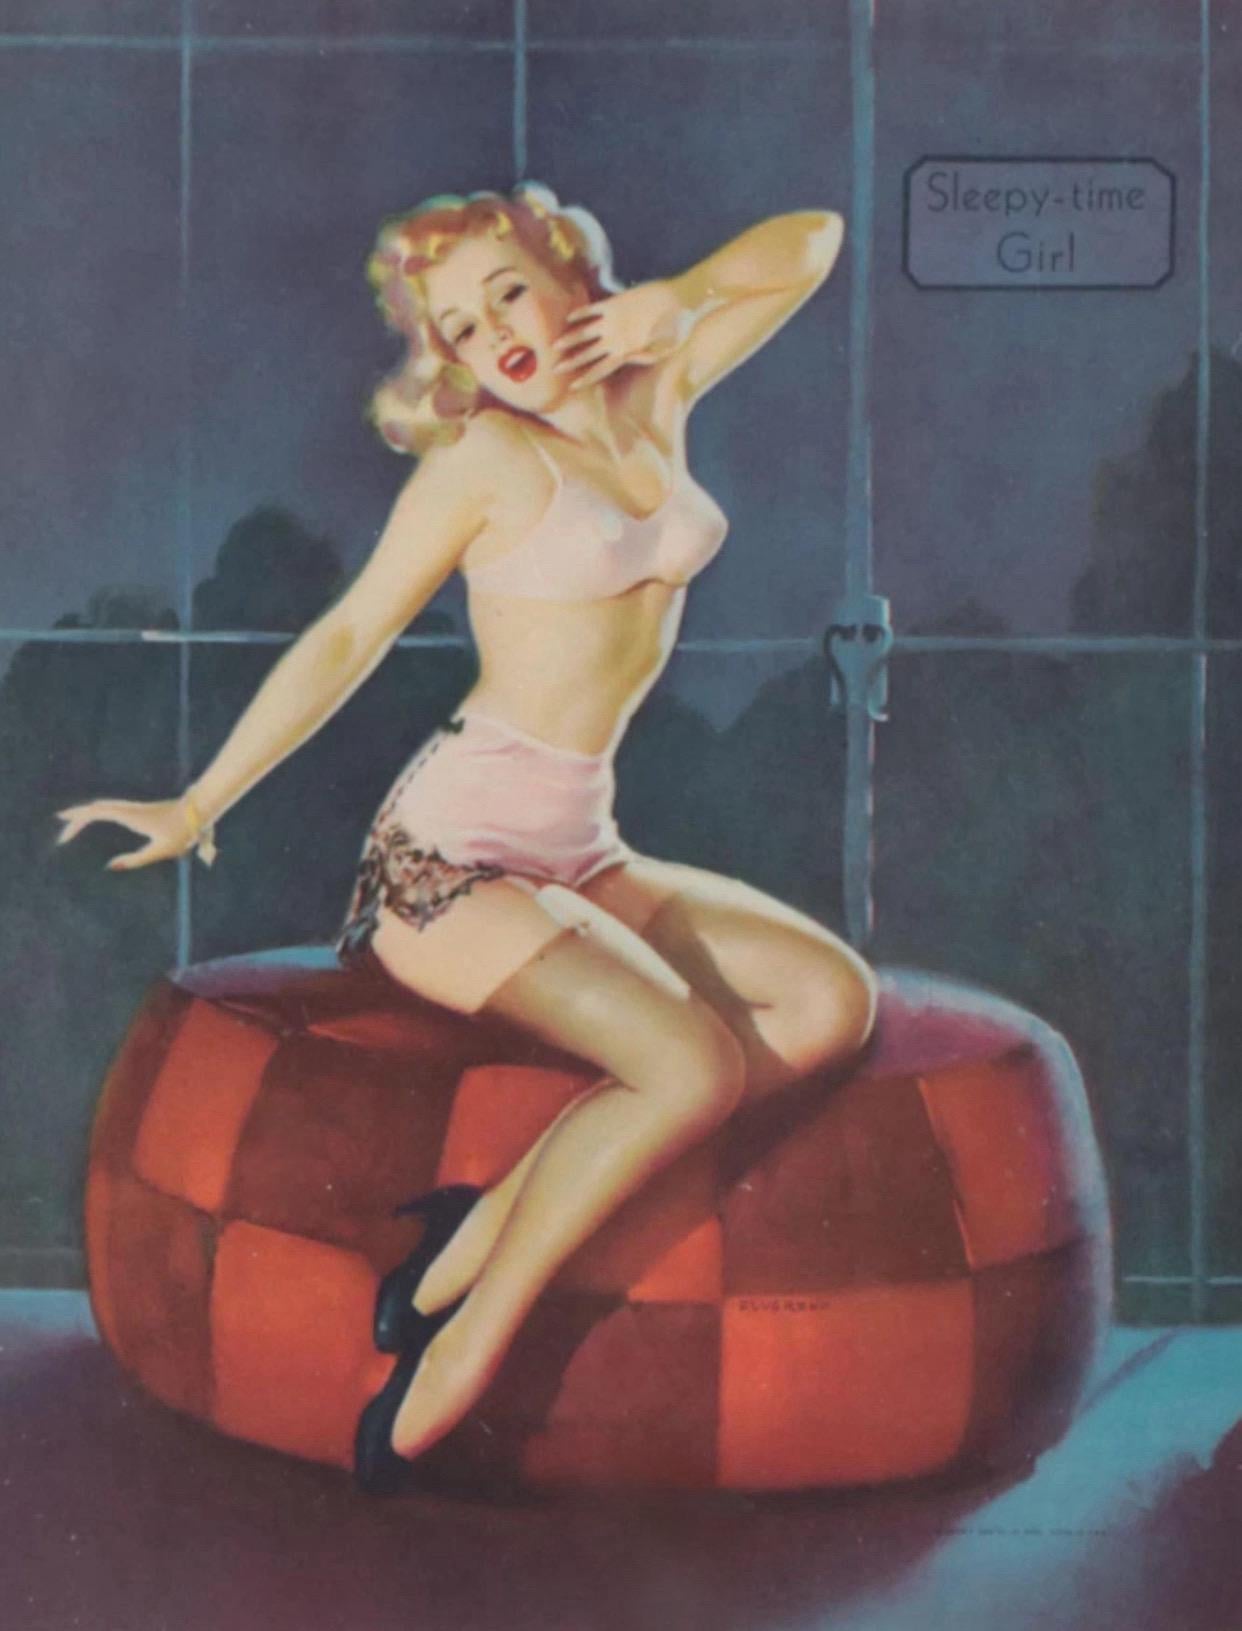 Black lacquered wood framed offset lithograph after Gil Elvgren, titled “Sleepy Time Girl”. Image site measurements, 7.5” x 9.5”. Framed measurements “12” x 15” x .5”. Not examined outside of the frame. 

About the artist; Gil Elvgren studied at the